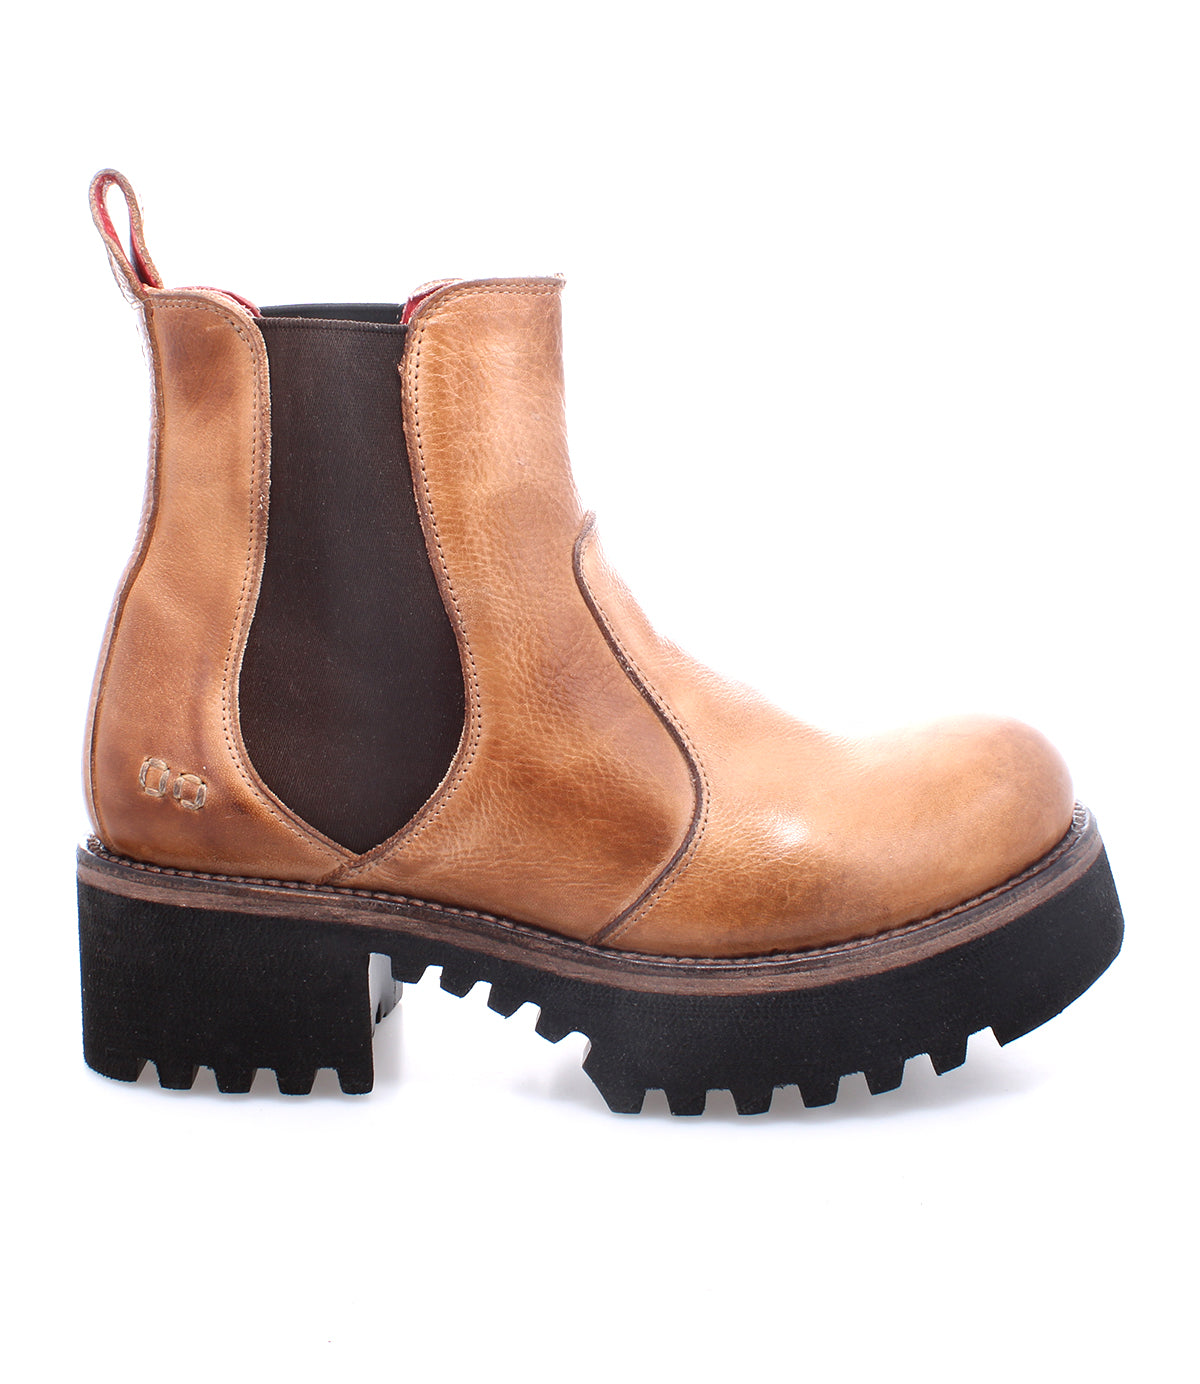 Valda Hi boot from Bed Stu, tan leather Chelsea boot with black soles.